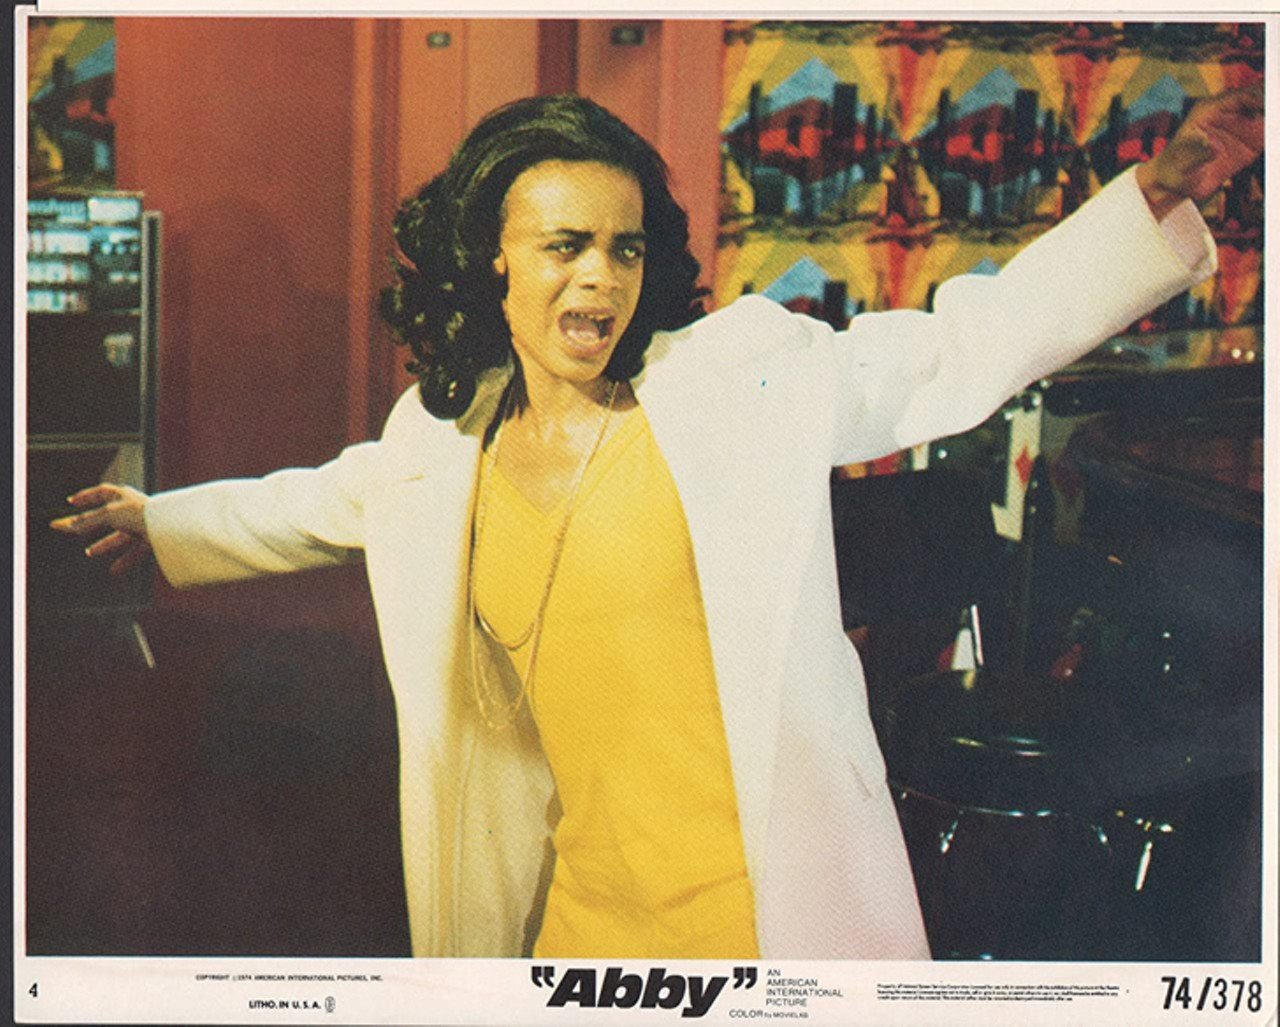 Abby (1974)
Local filming location: Louisville 
This movie, which some claim is a rip-off of &#147;The Exorcist,&#148; is a &#147;blaxploitation&#148; horror movie about a woman possessed by an African sex demon. Director William Girdler, who also directed &#147;Sheba, Baby,&#148; was a Louisvillian, so it&#146;s no surprise that the city shows up throughout his movies. 
Photo via American International Pictures (AIP) / Mid-America Pictures / Hollywood West Entertainment